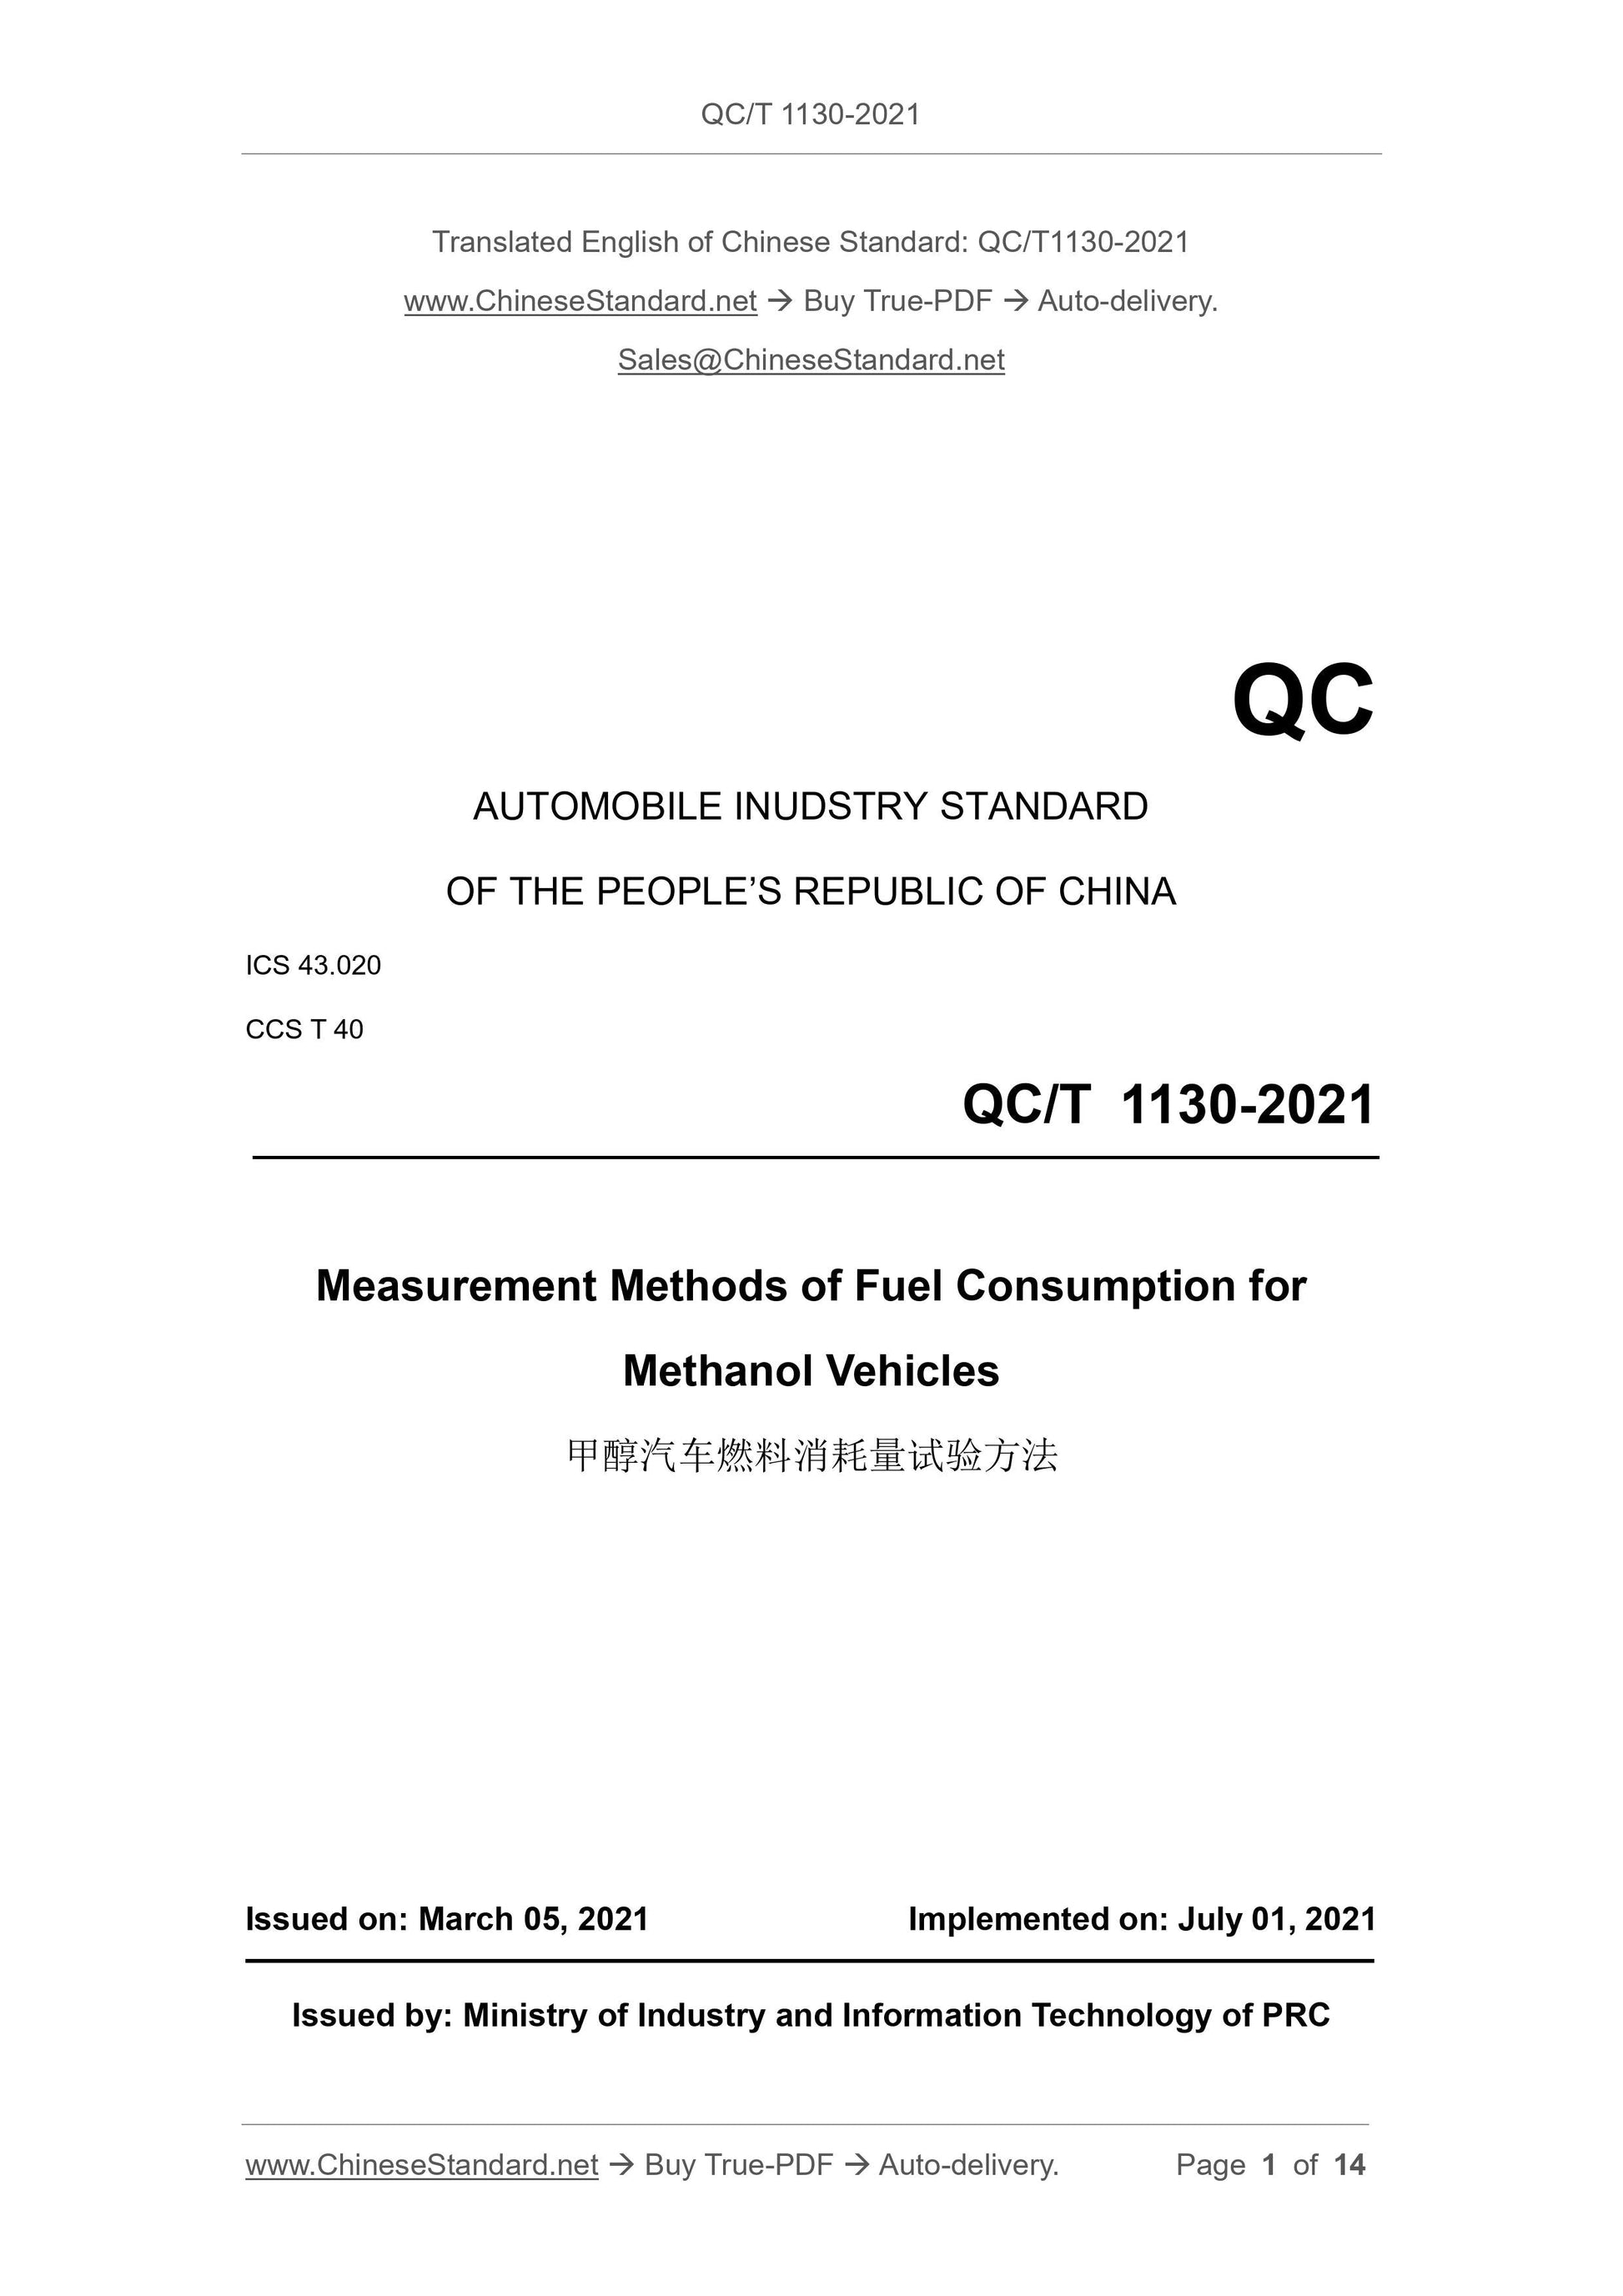 QC/T 1130-2021 Page 1